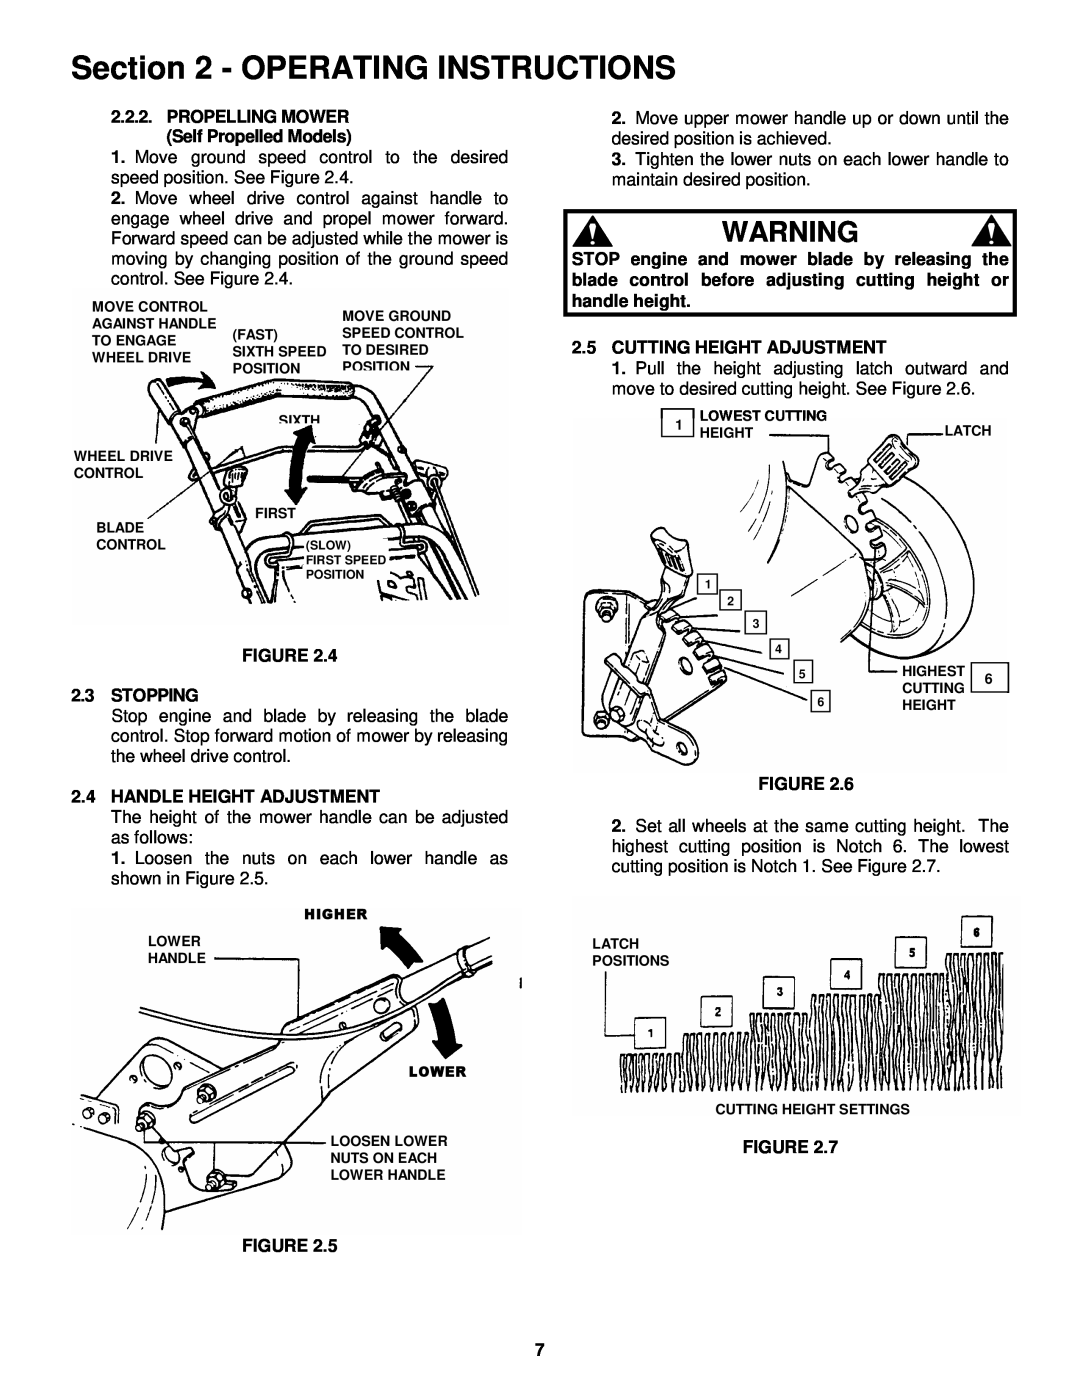 Snapper GP215512KWV Operating Instructions, 2.5CUTTING HEIGHT ADJUSTMENT, Figure, Stopping, Handle Height Adjustment 